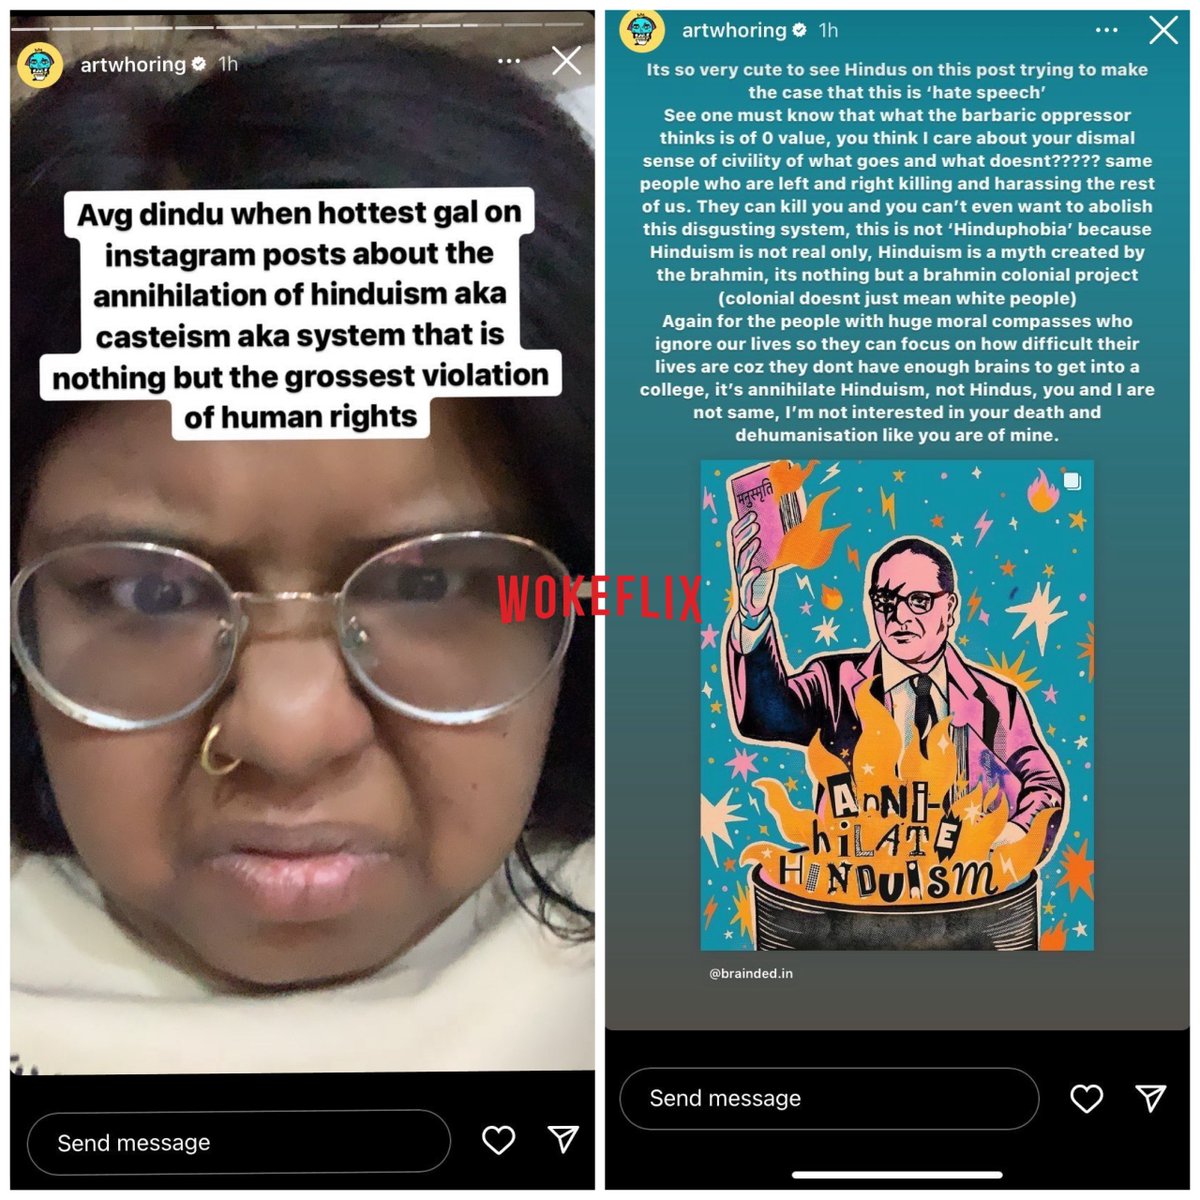 This poster was reported by us way back in Feb, 2022. @instagram decided it was ok to post this and never took any action. It was reported repeatedly but in vain. She continues to thrive on Hindu hate. Waiting for MiLords to say ‘We will rip you apart’.